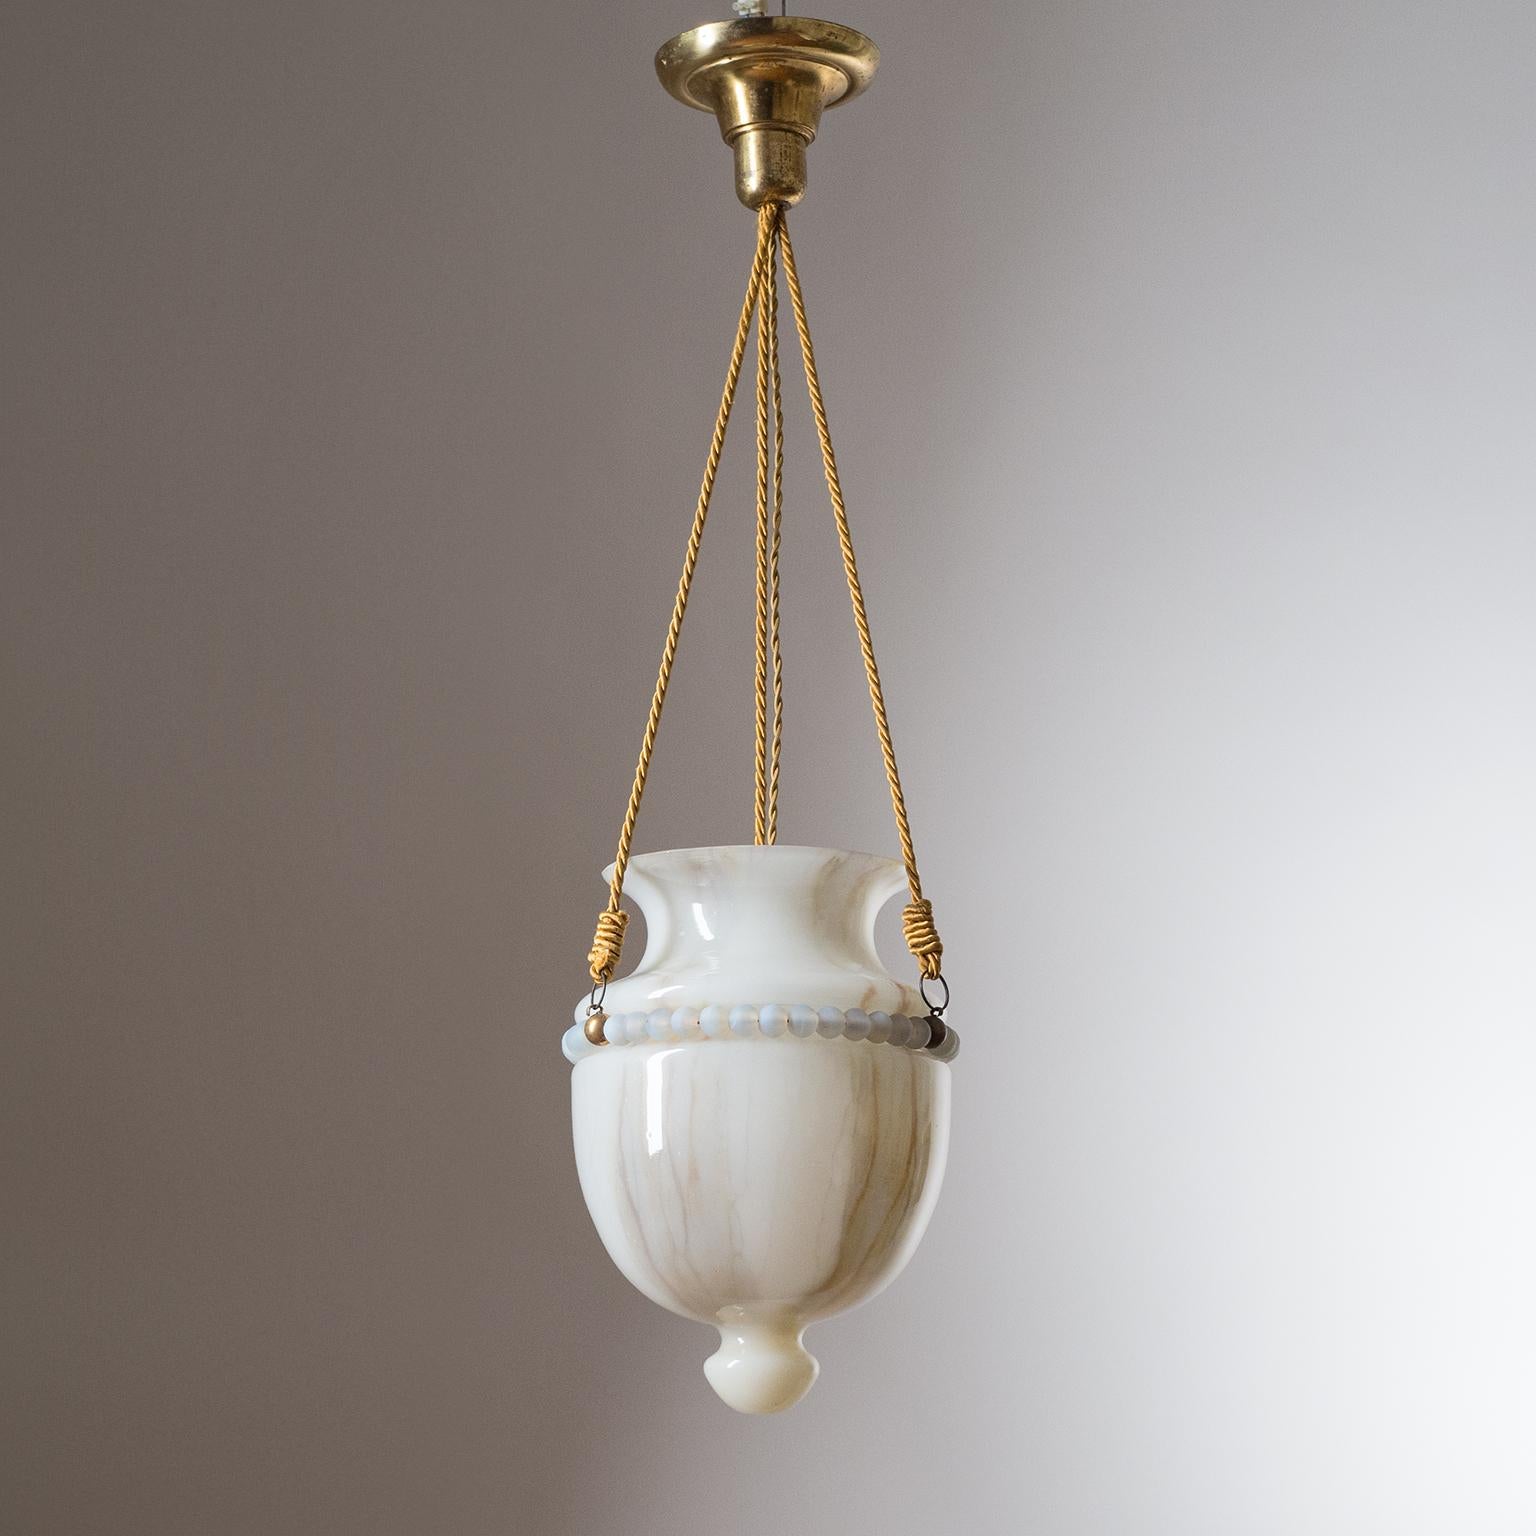 Rare neoclassical Art Deco lantern, circa 1930, with an urn-shaped, hand painted marbled glass body. Suspended by three twisted cords which attach to a ring of large glass beads. The urn- or bell-shaped glass body has a marbled effect which was hand